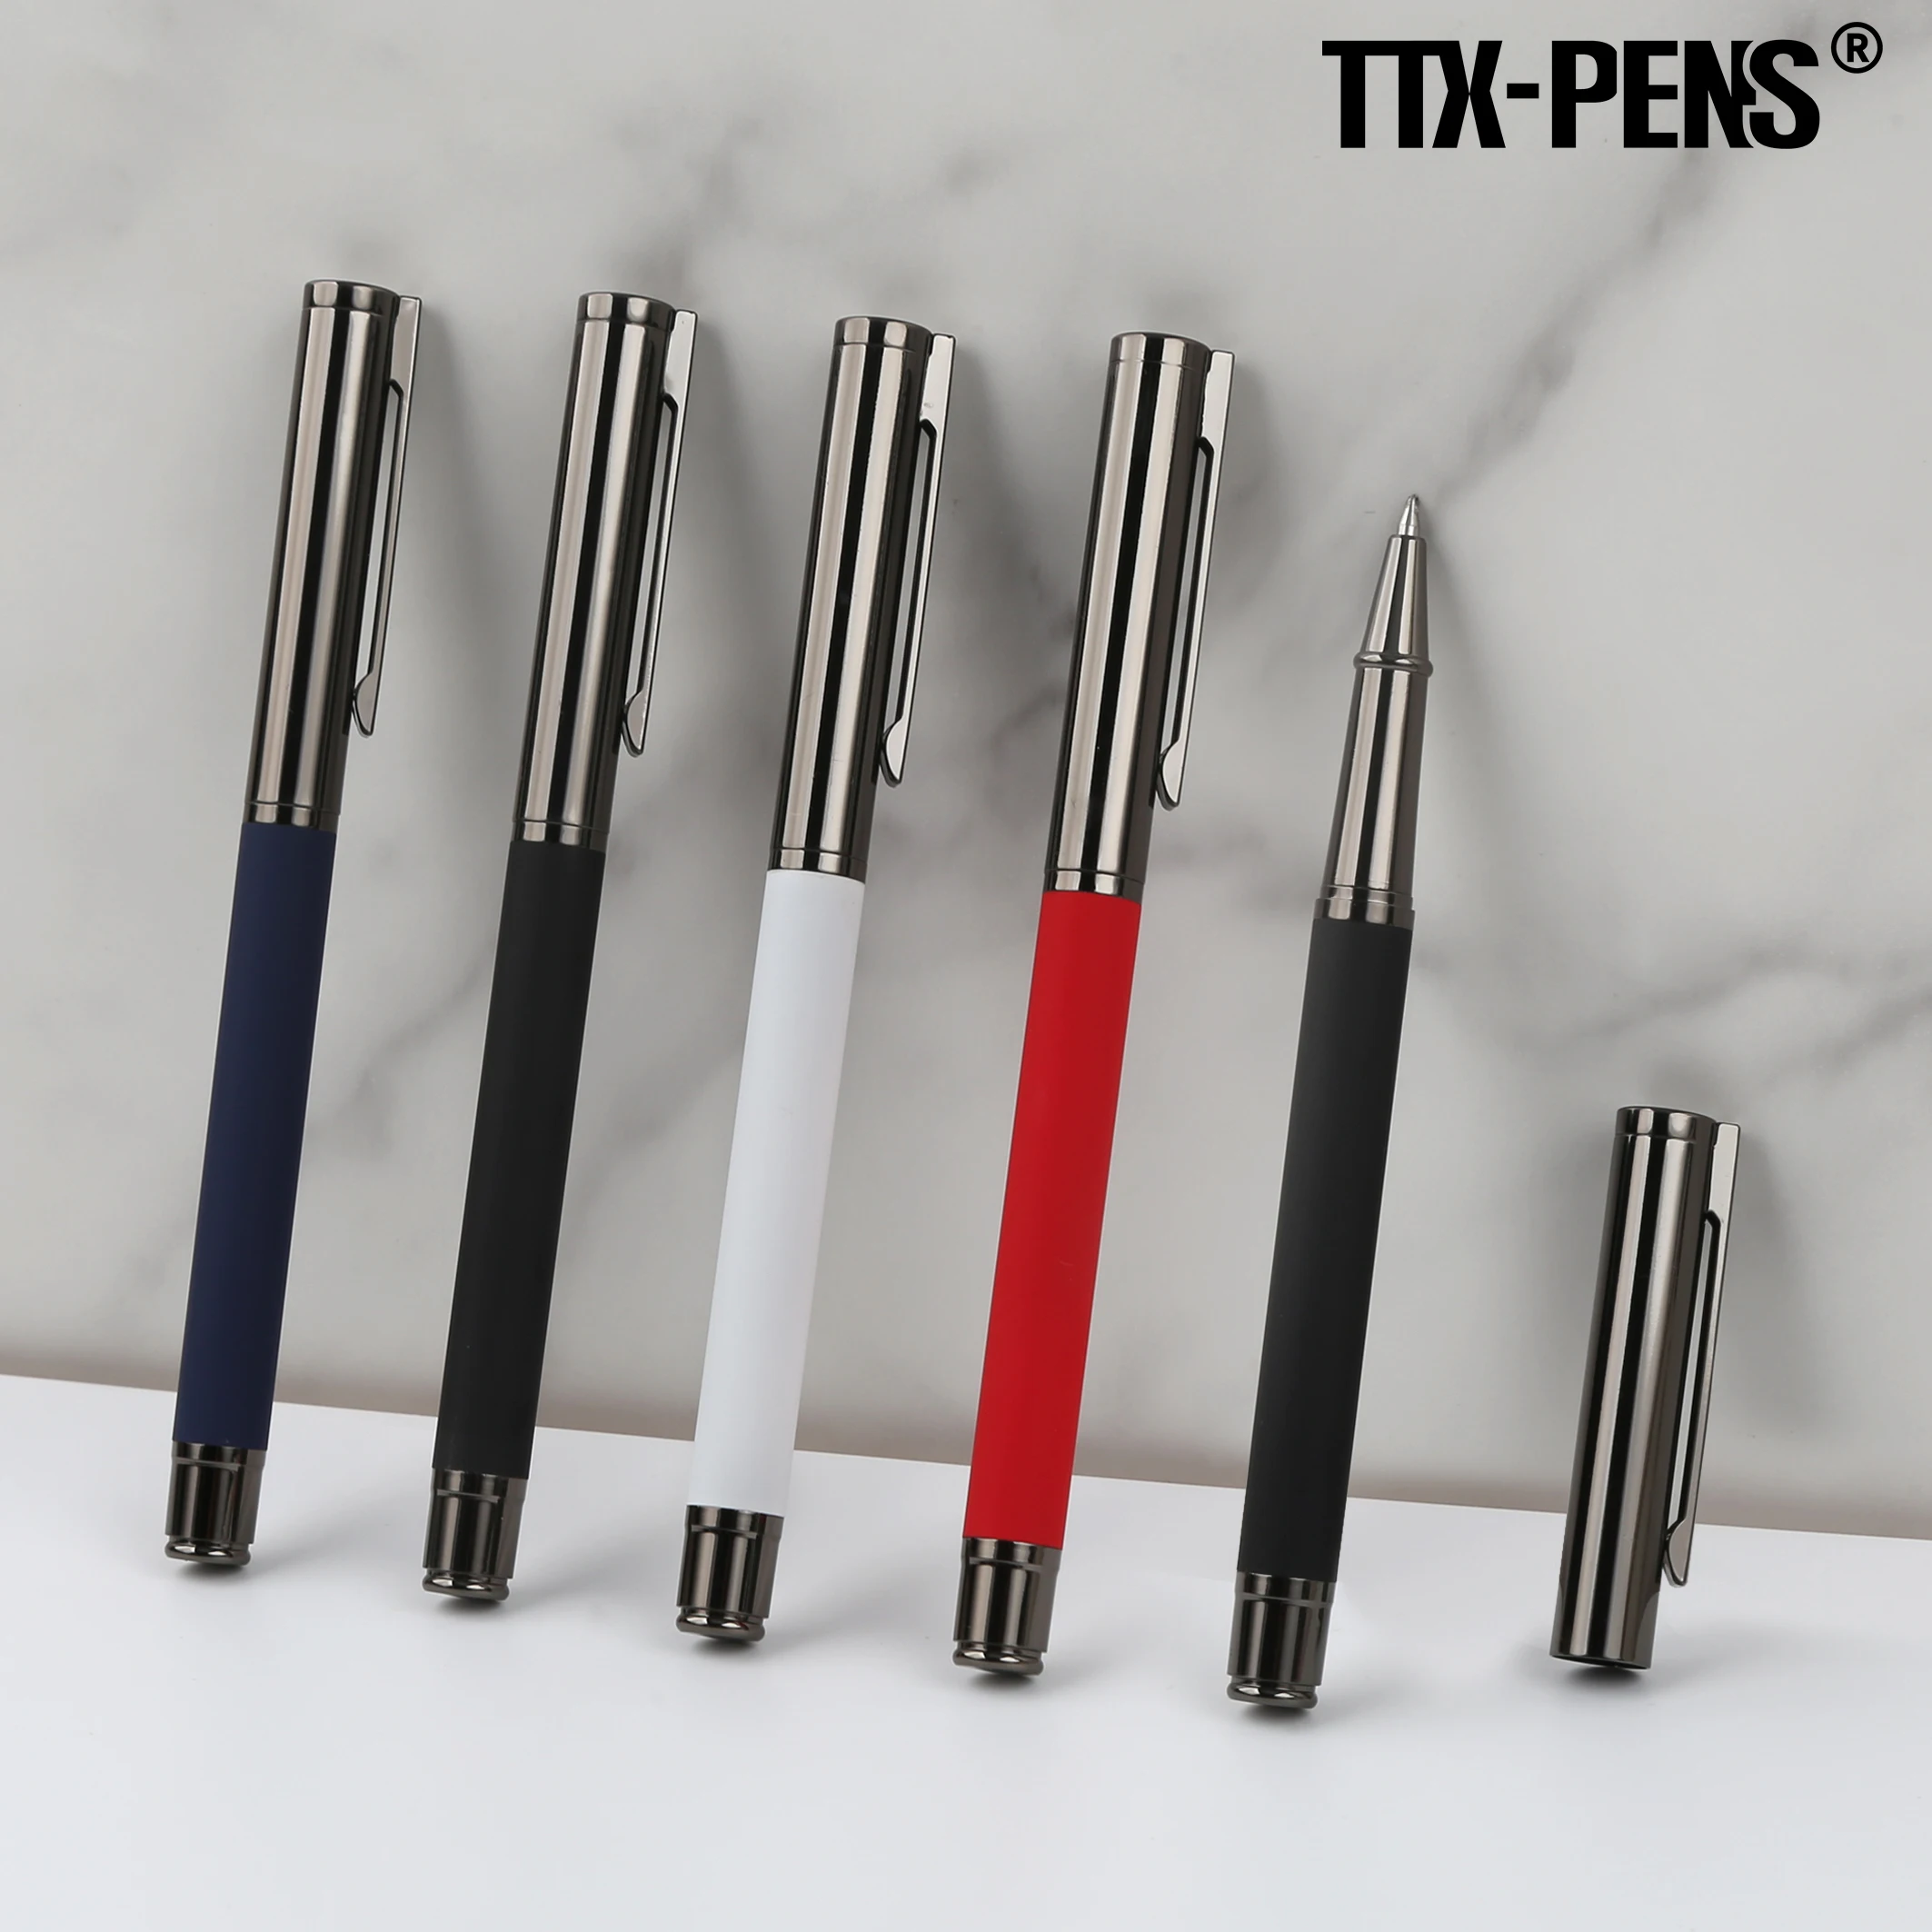 TTX 1.0 mm Retractable Luxury Personalised Executive Gift Metal Pen Clip Slim Ballpoint Roller Pen Stylo Personnalisable